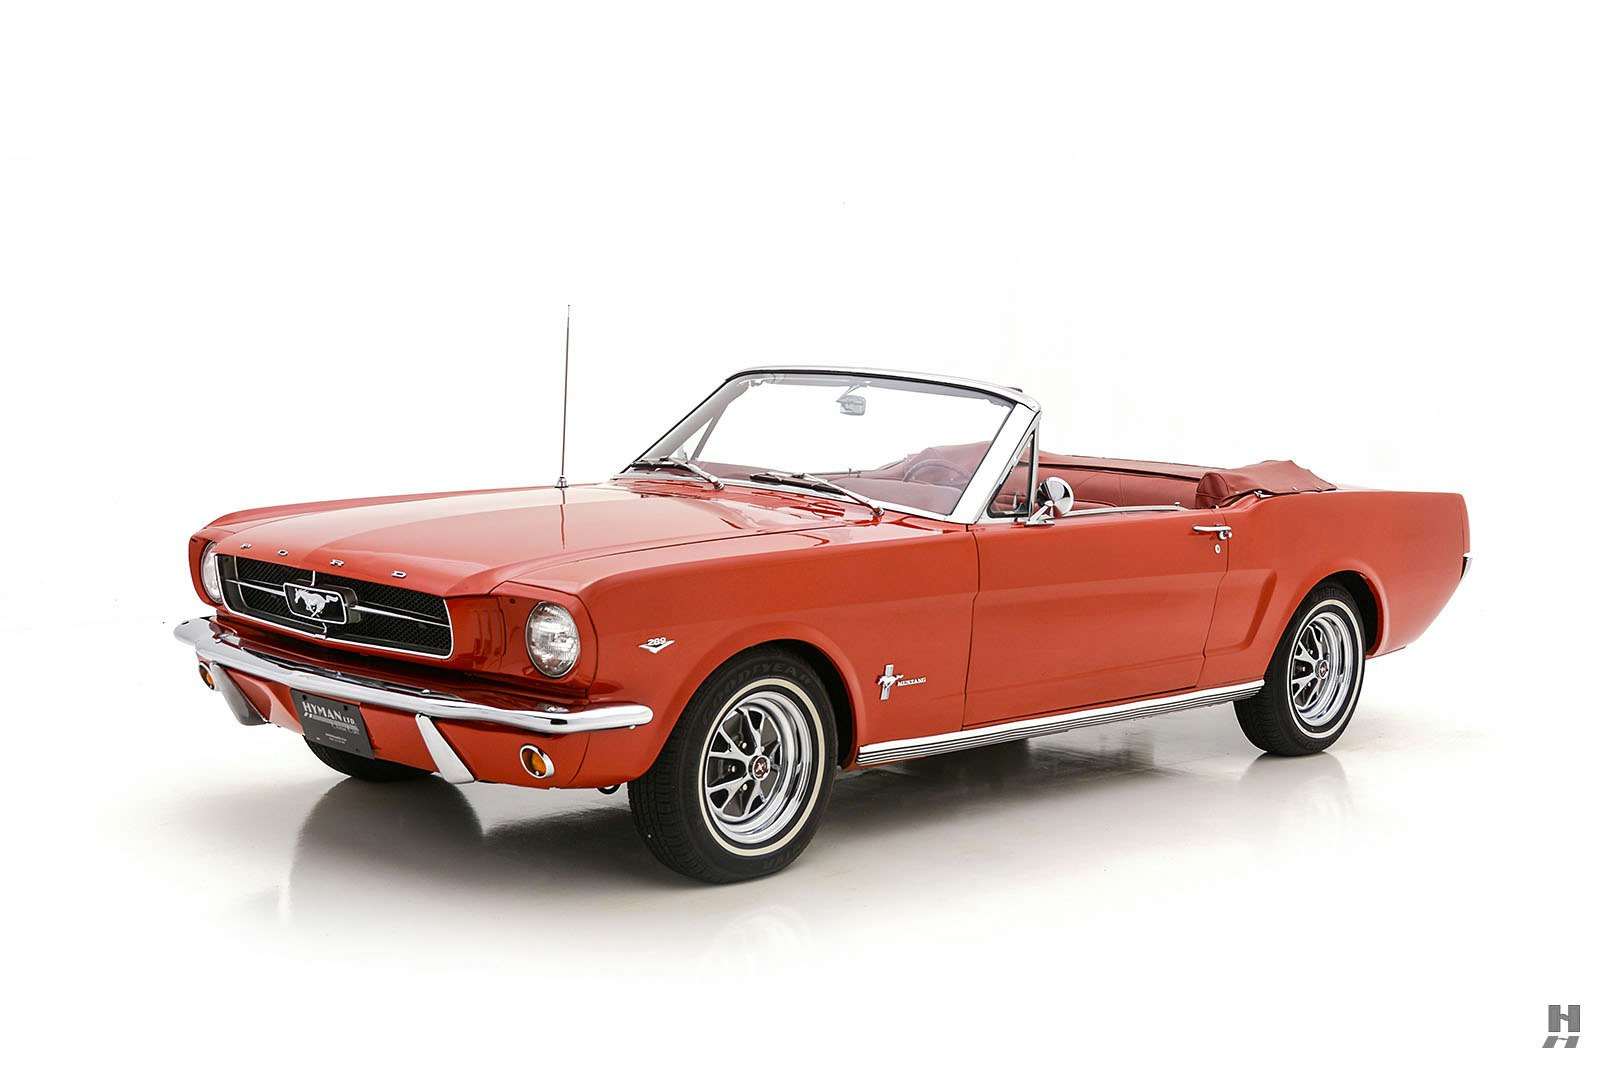 1965 Ford Mustang 2dr Convertible Courtesy of Hyman Ltd.